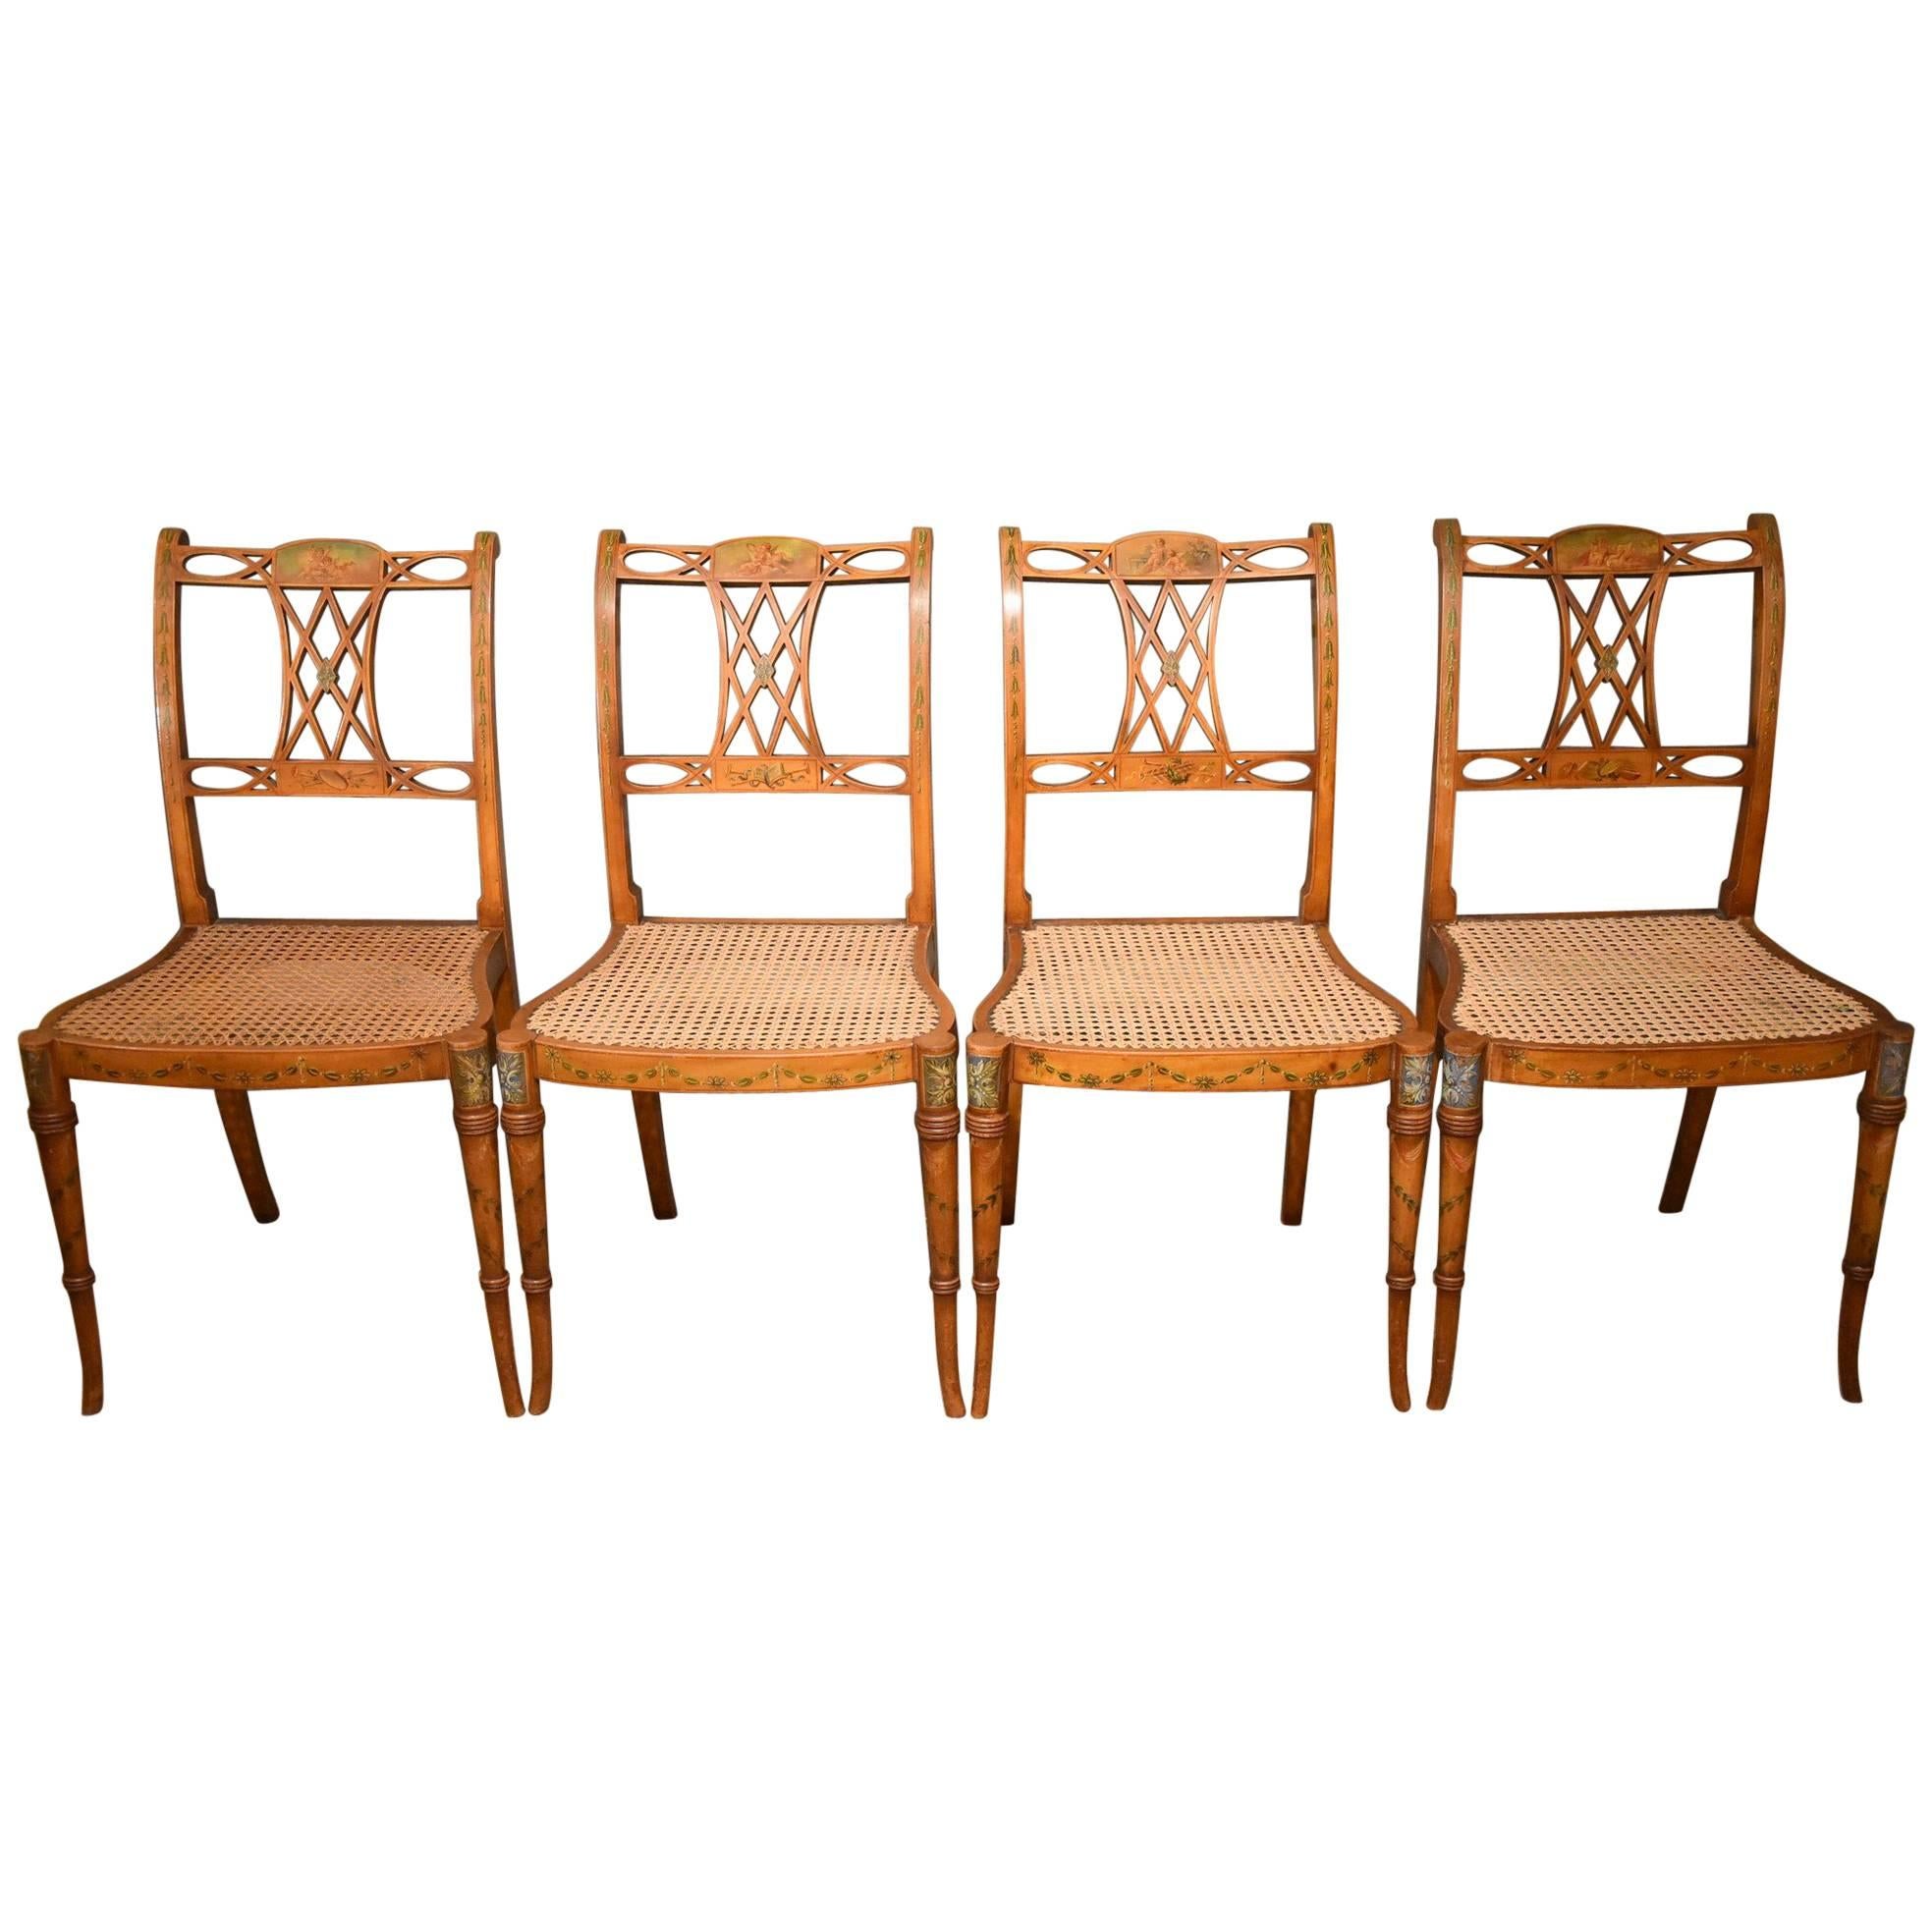 Late 19th Century Set of Four Satinwood Hand-Painted Chairs